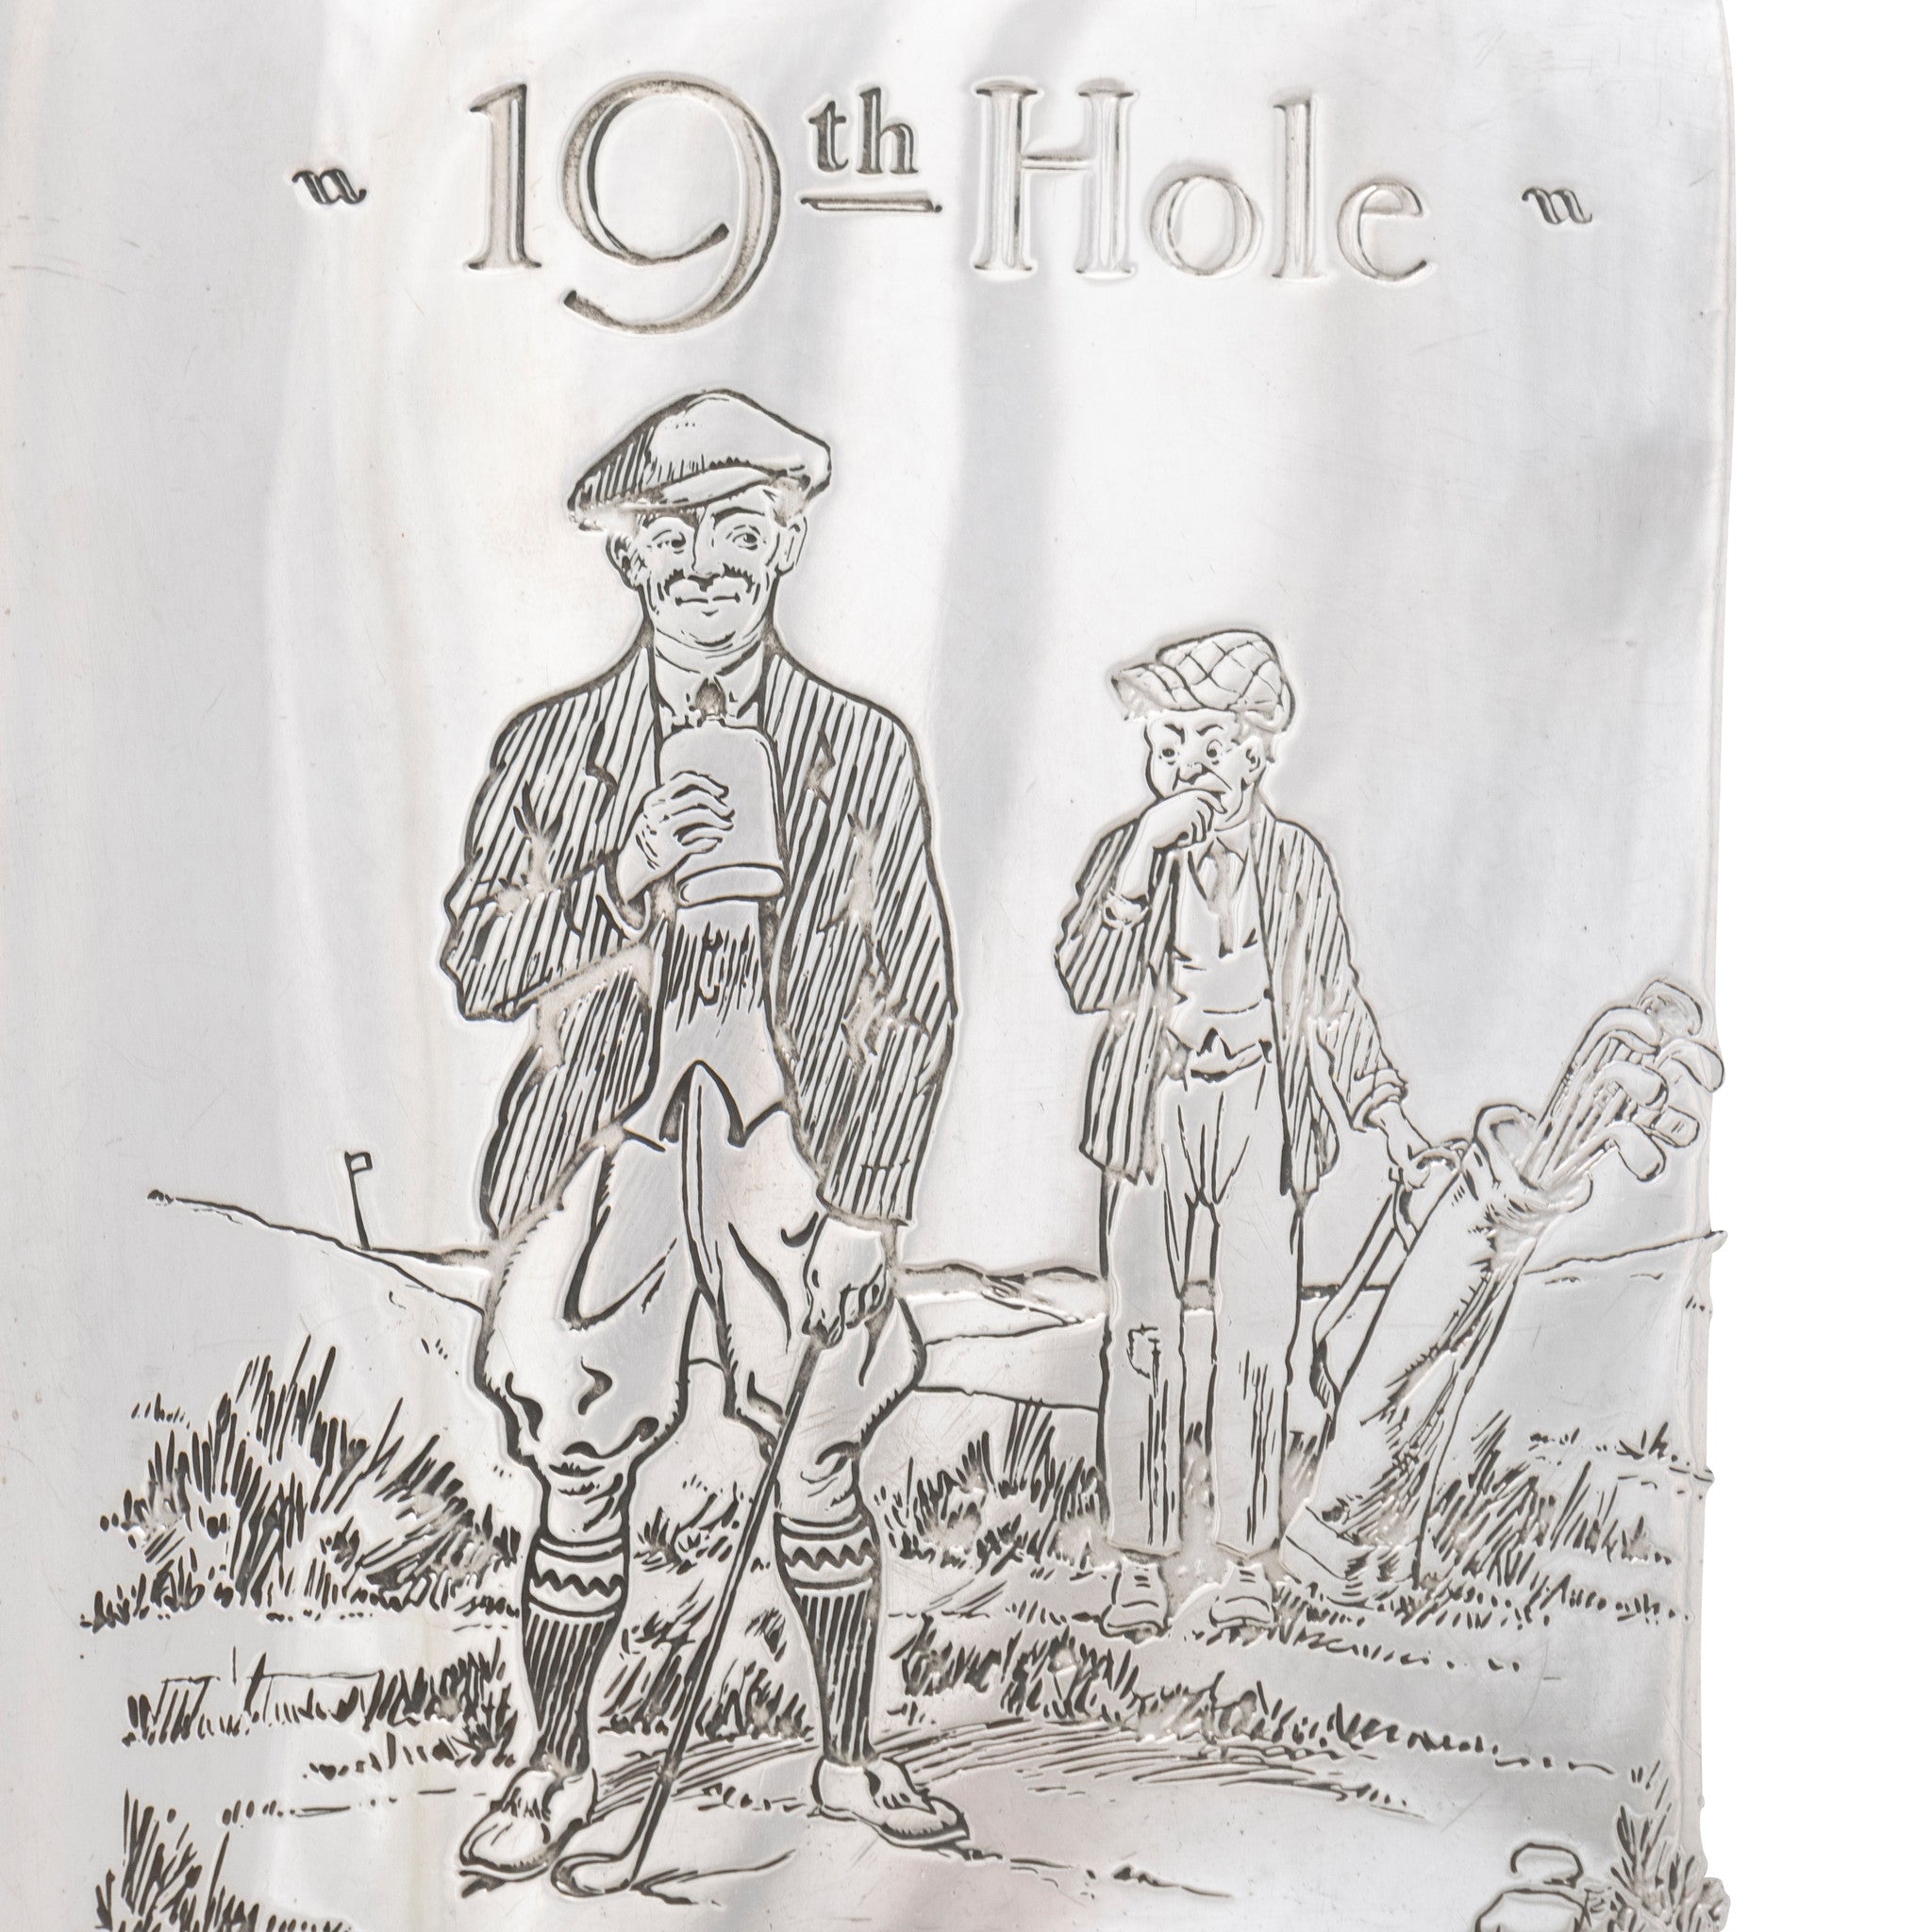 Golf Theme Sterling Flask